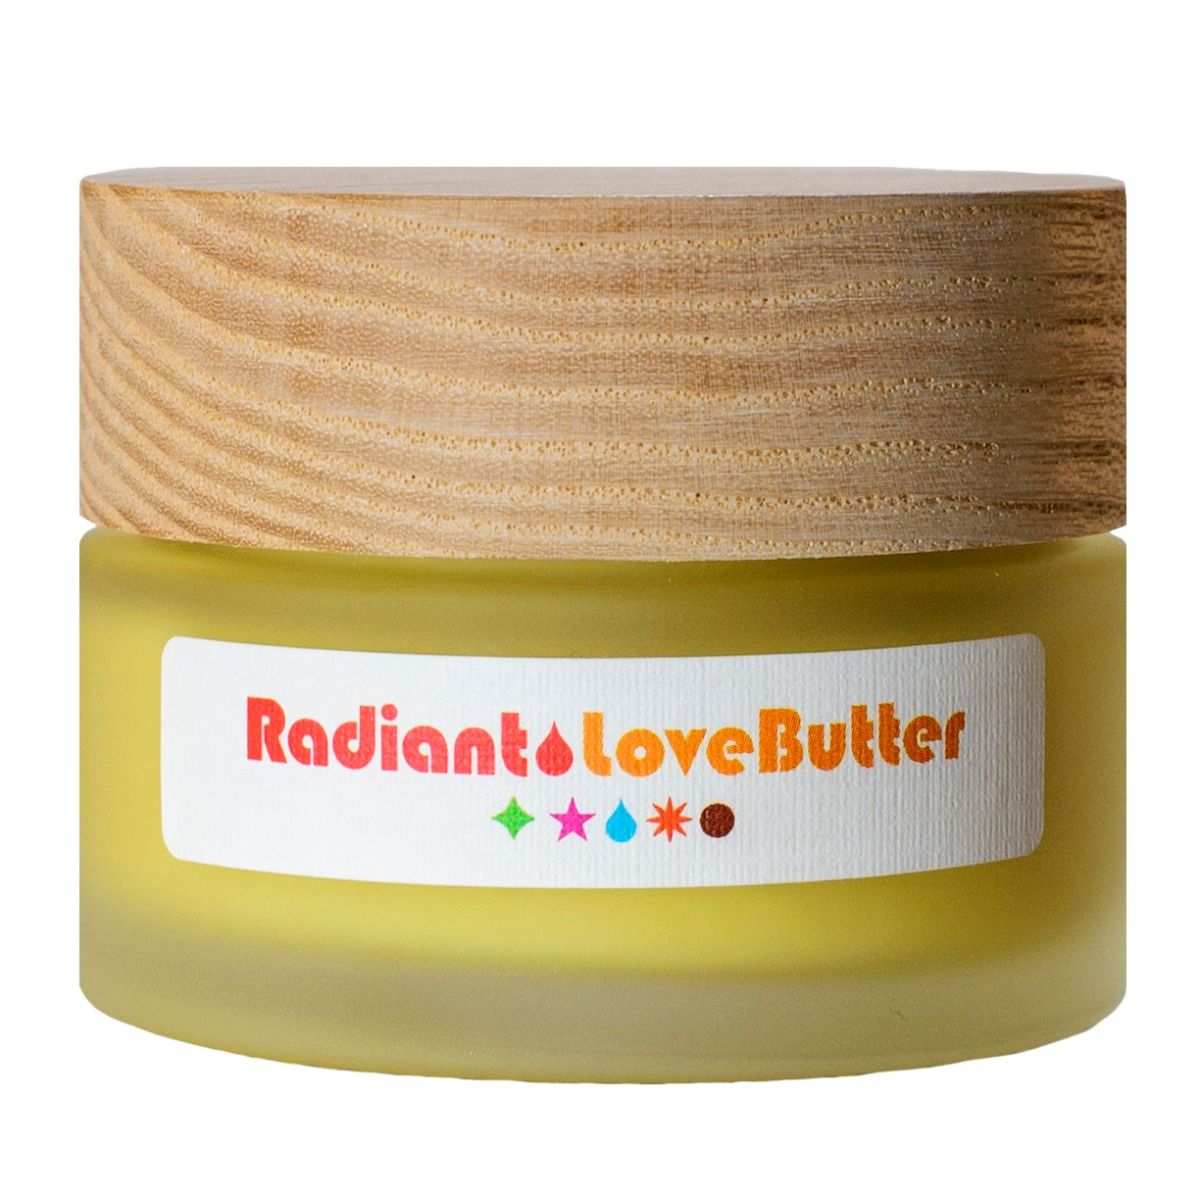 Radiant Love Butter by Living Libations Wellness Living Libations Prettycleanshop